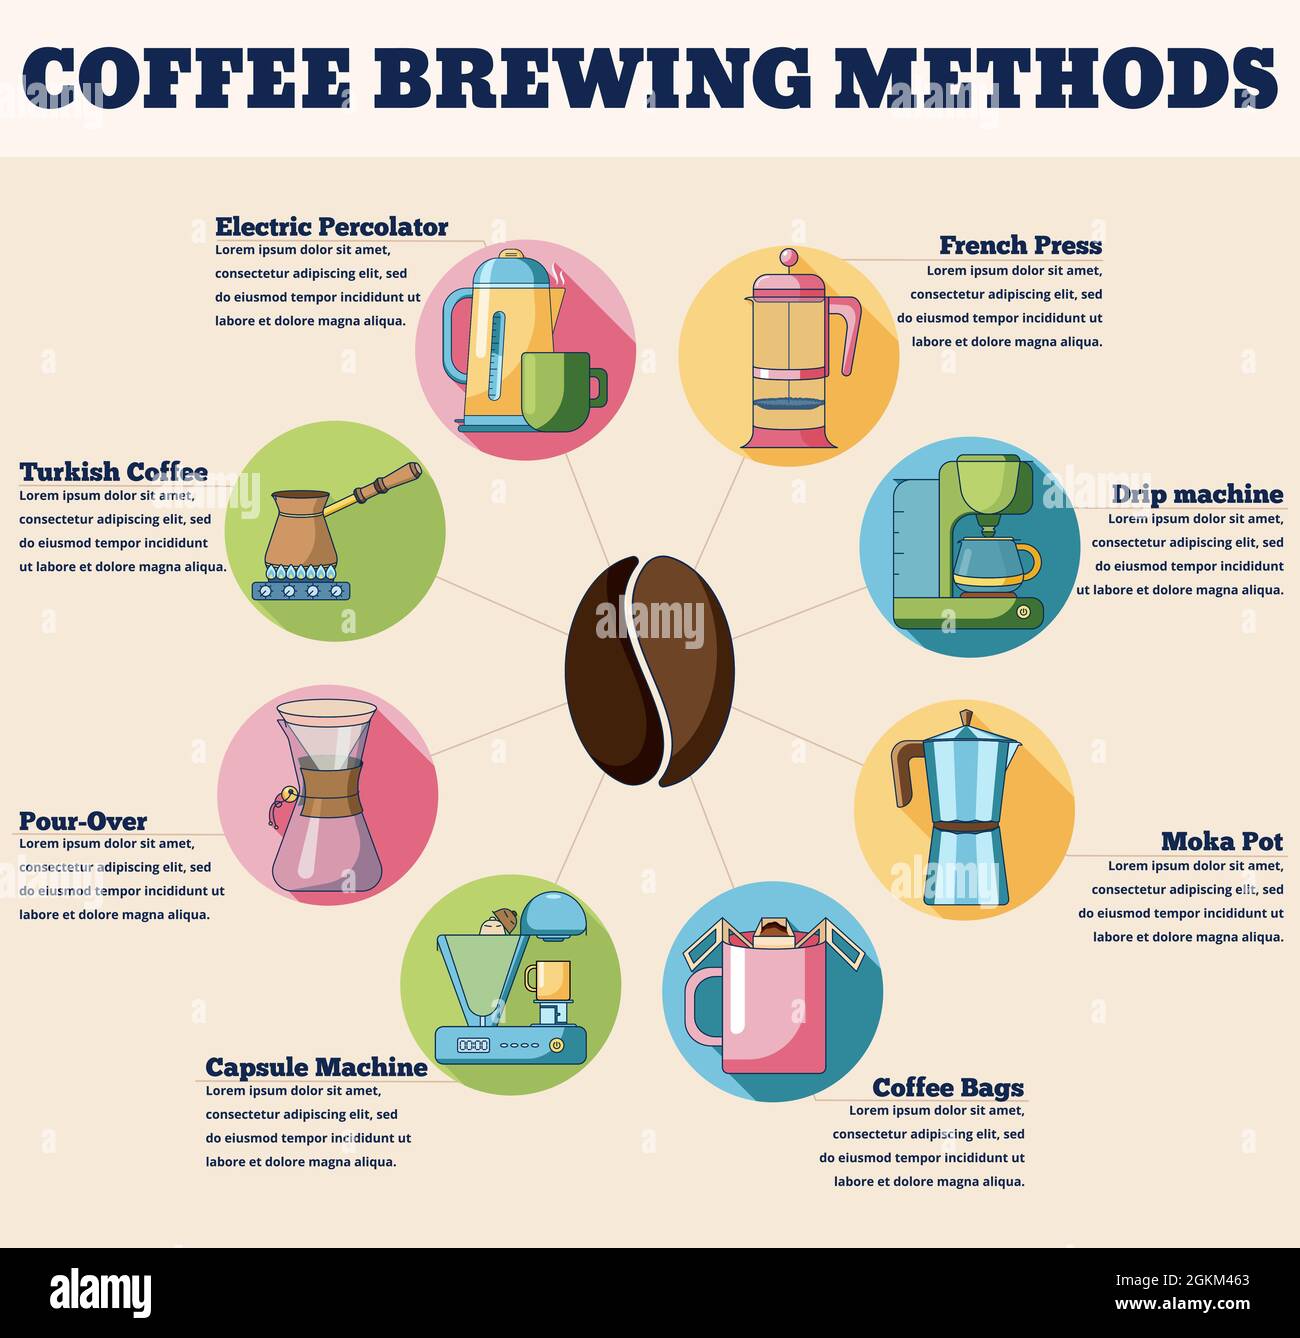 https://c8.alamy.com/comp/2GKM463/coffee-brewing-methods-concept-infographics-flat-design-vector-illustration-of-coffee-brewing-concept-isolated-on-a-beige-background-2GKM463.jpg